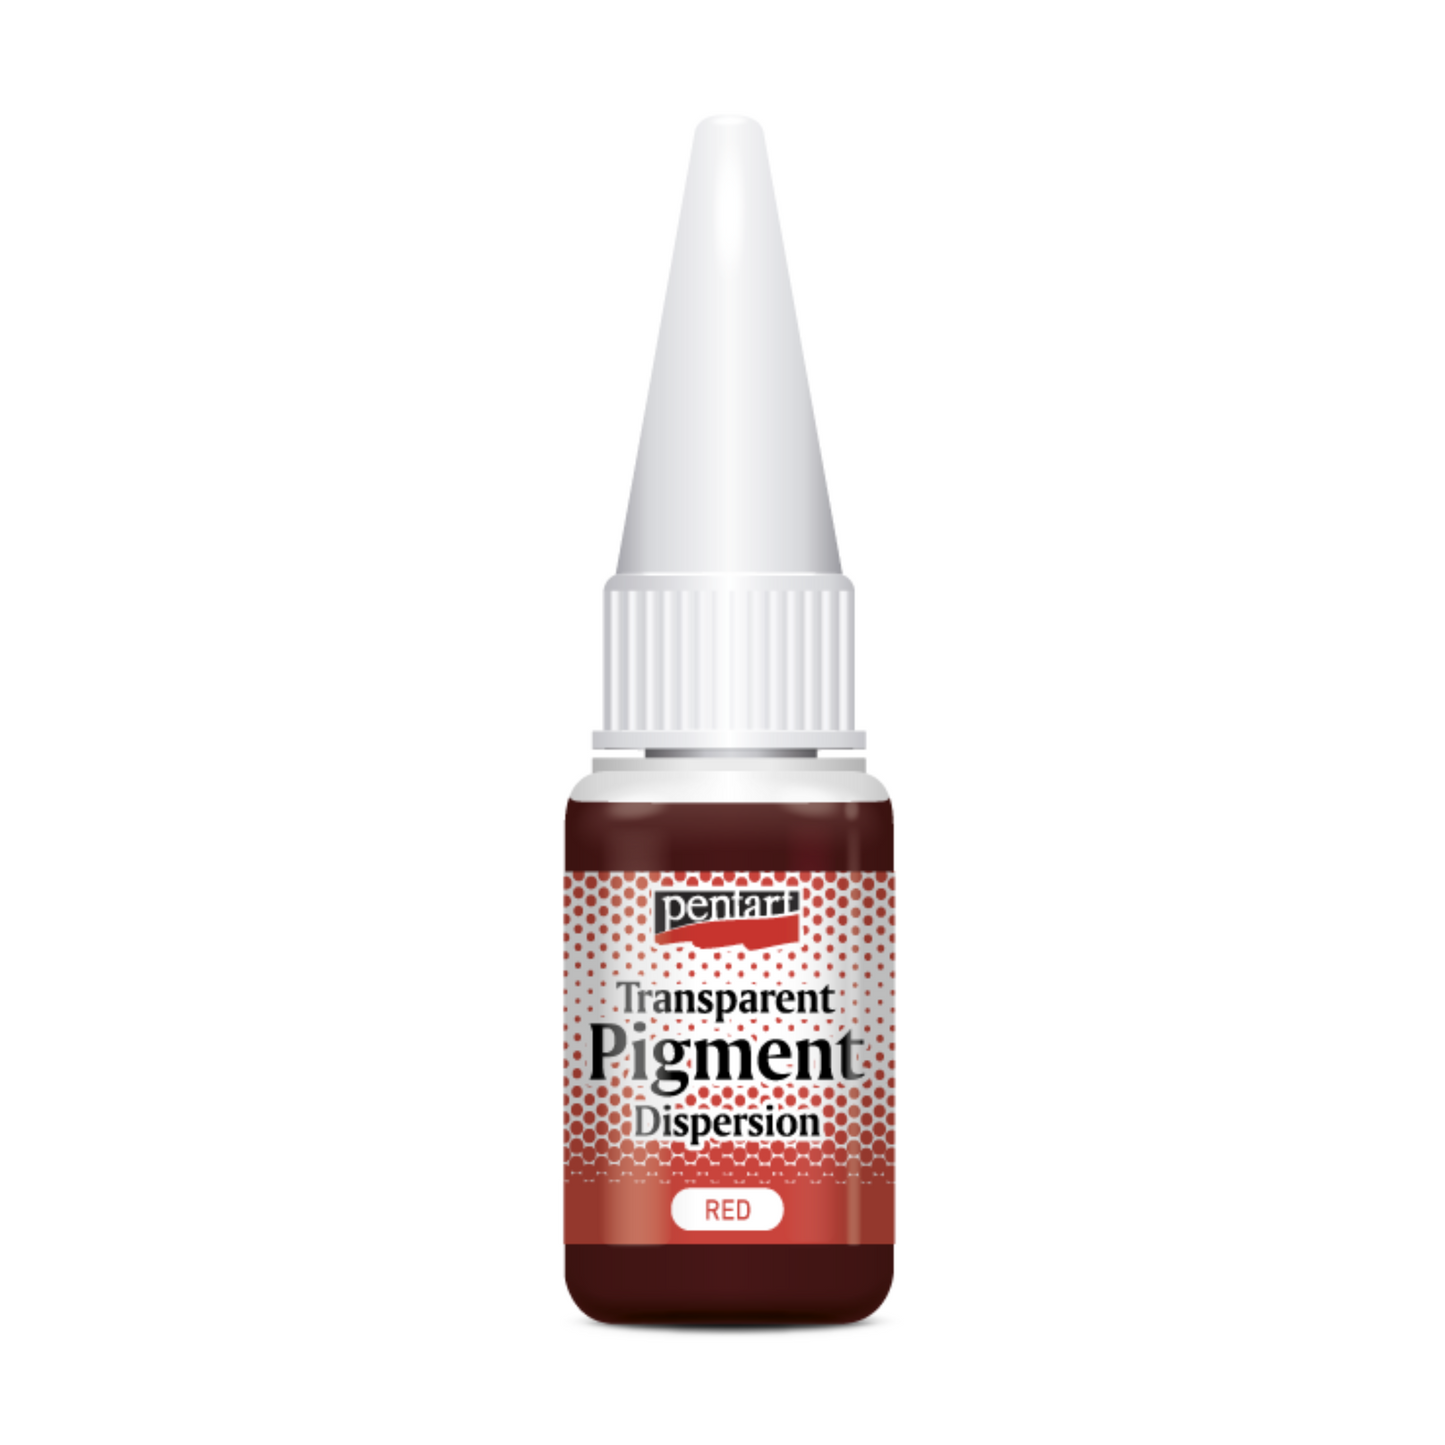 Transparent Pigment Dispersion in Red by Pentart available at Milton's Daughter.